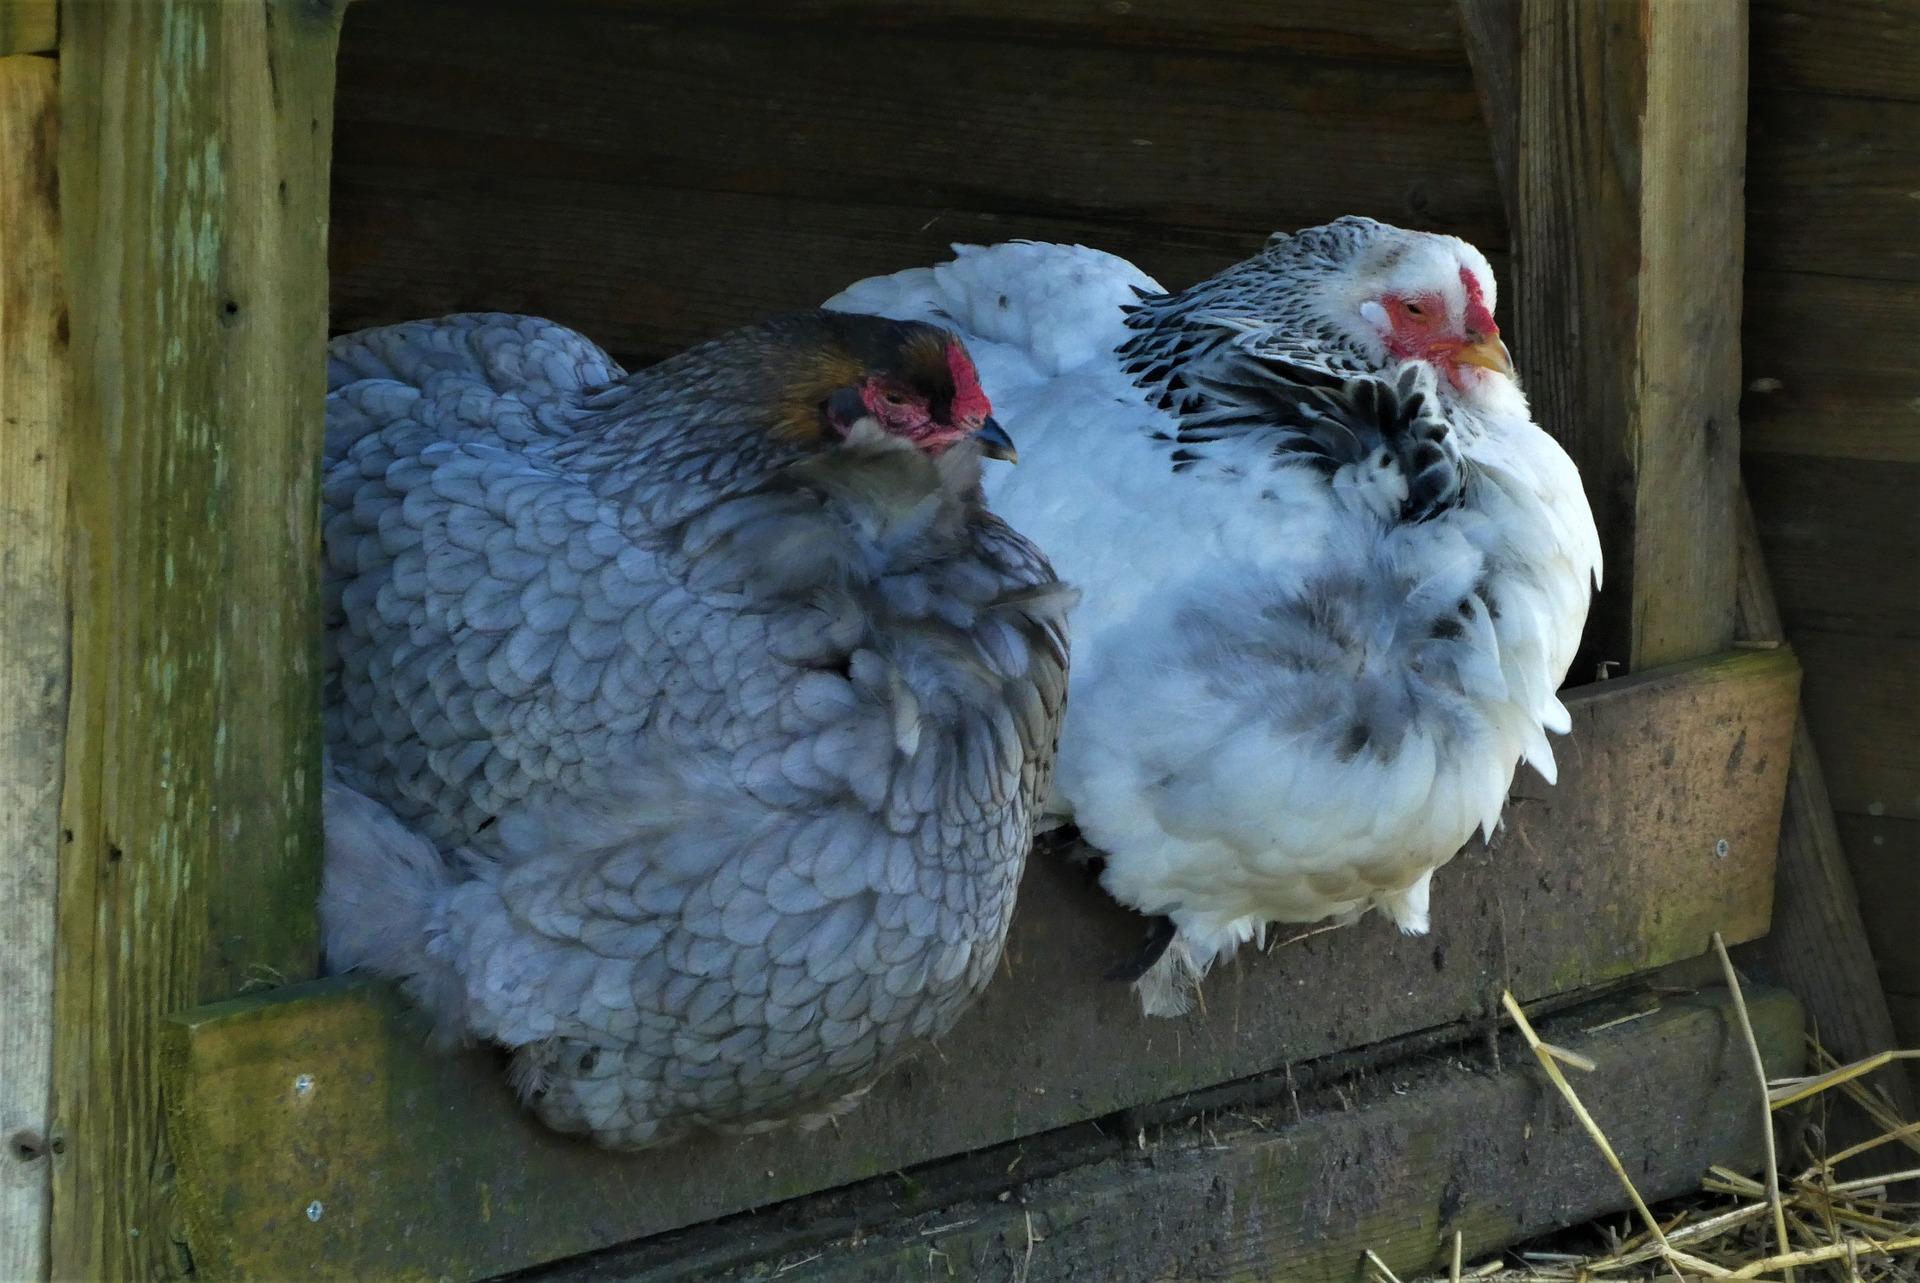 uploads/images/Chickens 4962024_1920